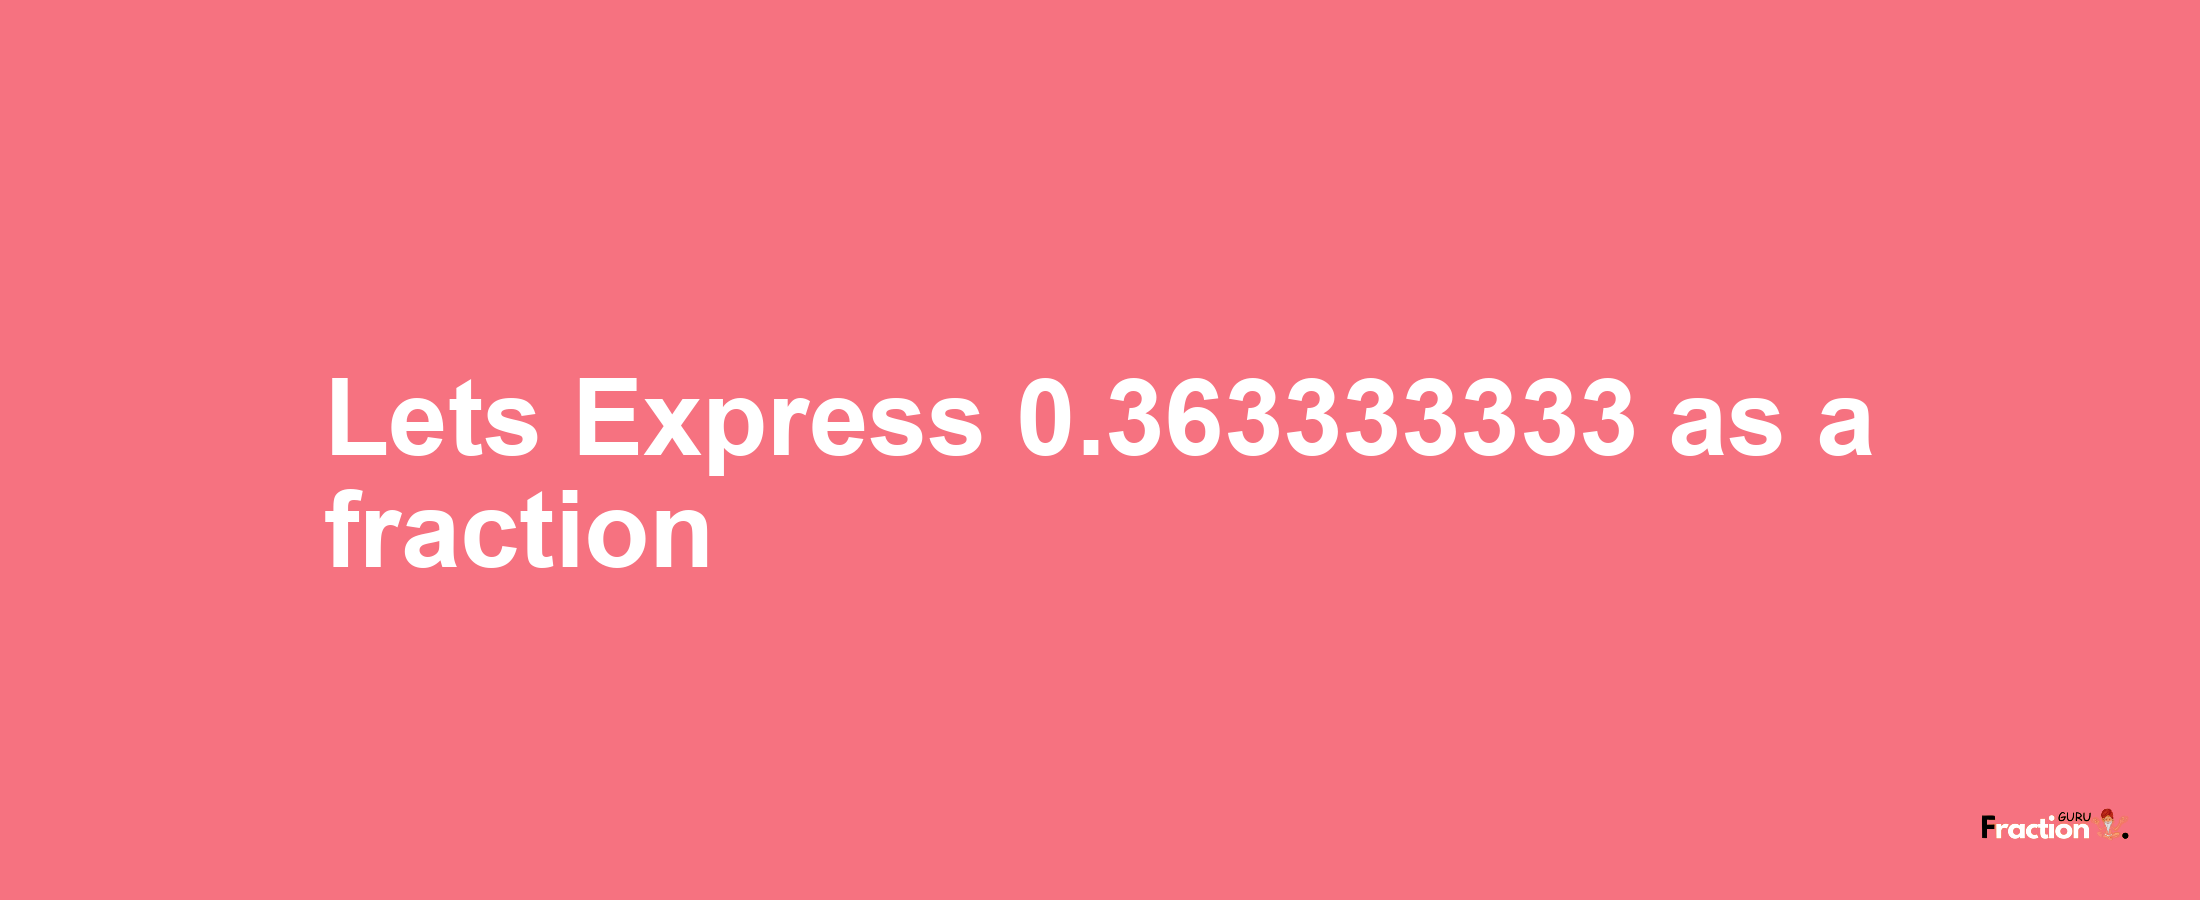 Lets Express 0.363333333 as afraction